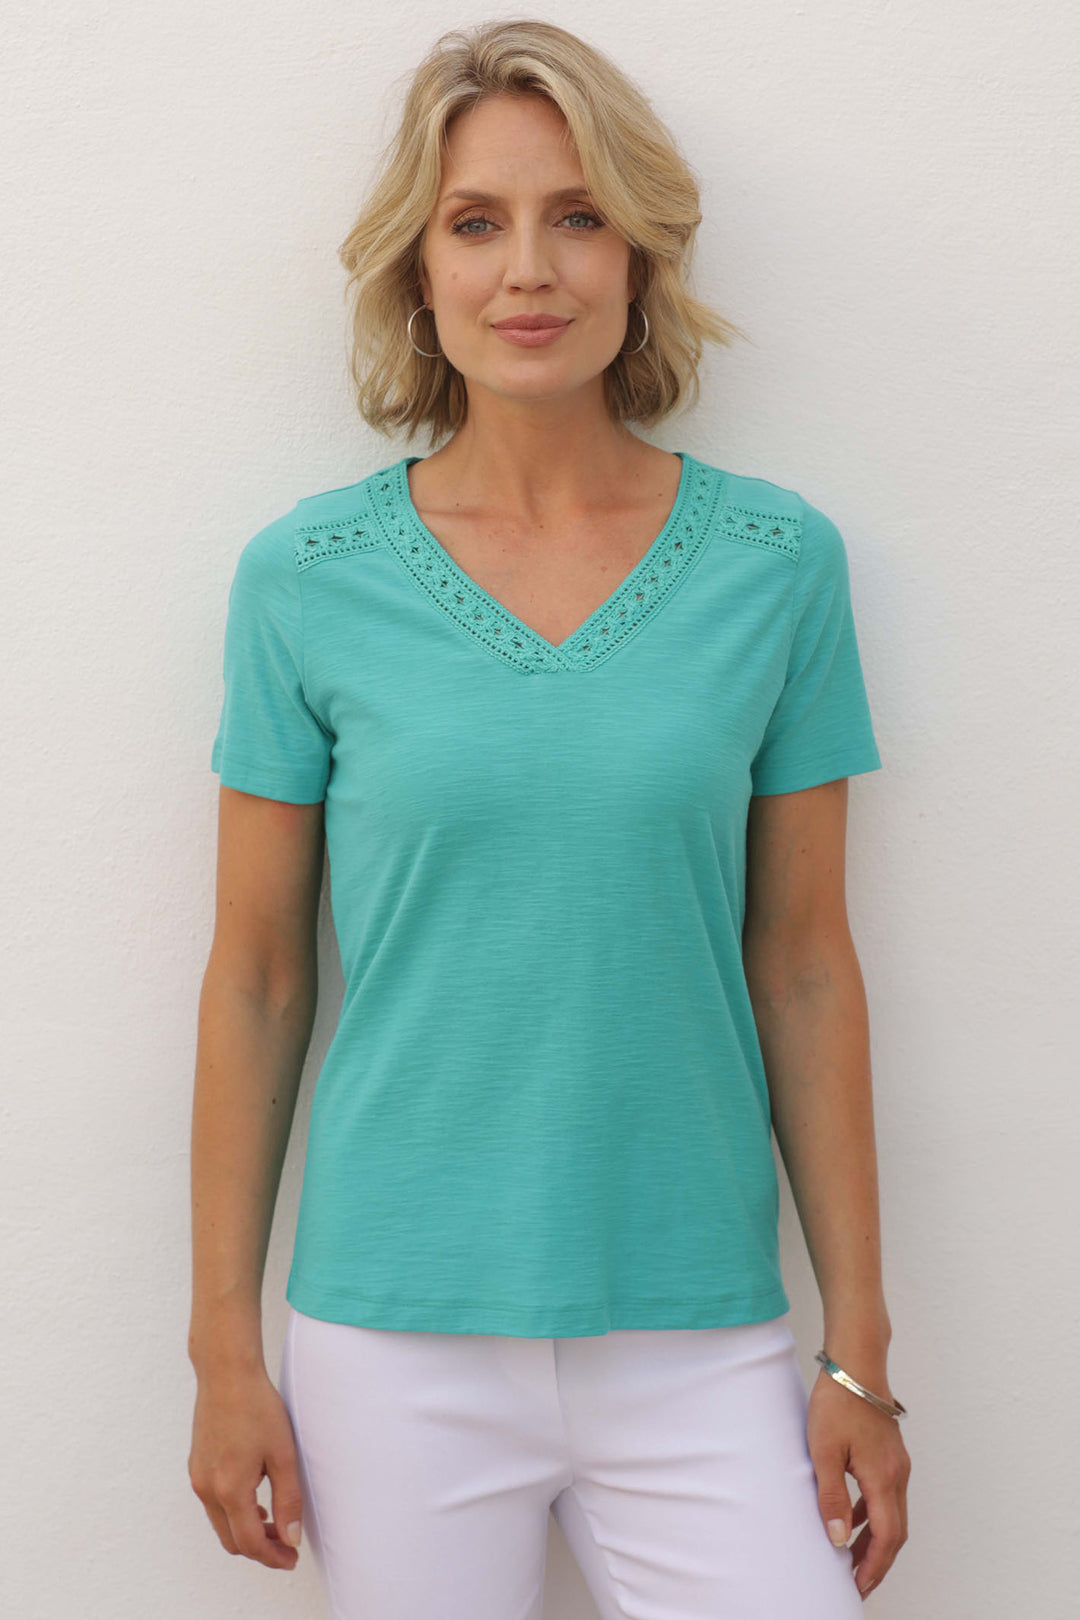 Pomodoro 82403 Sea Green Lace Insert T-Shirt - Rouge Boutique Inverness